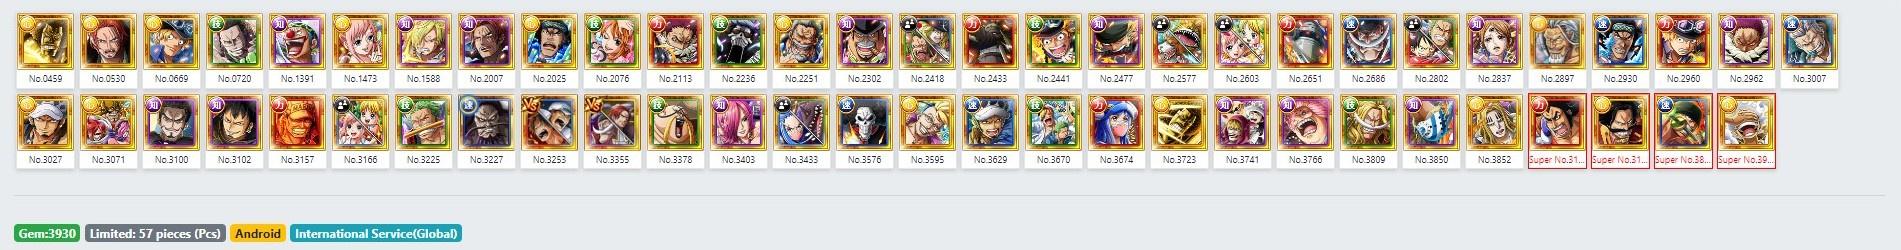 G5 Luffy-Zoro- Roger [Android] GLOBAL Best Starter lv3 Story Untouched Top Tier Characters 3900+ Gems Check Description